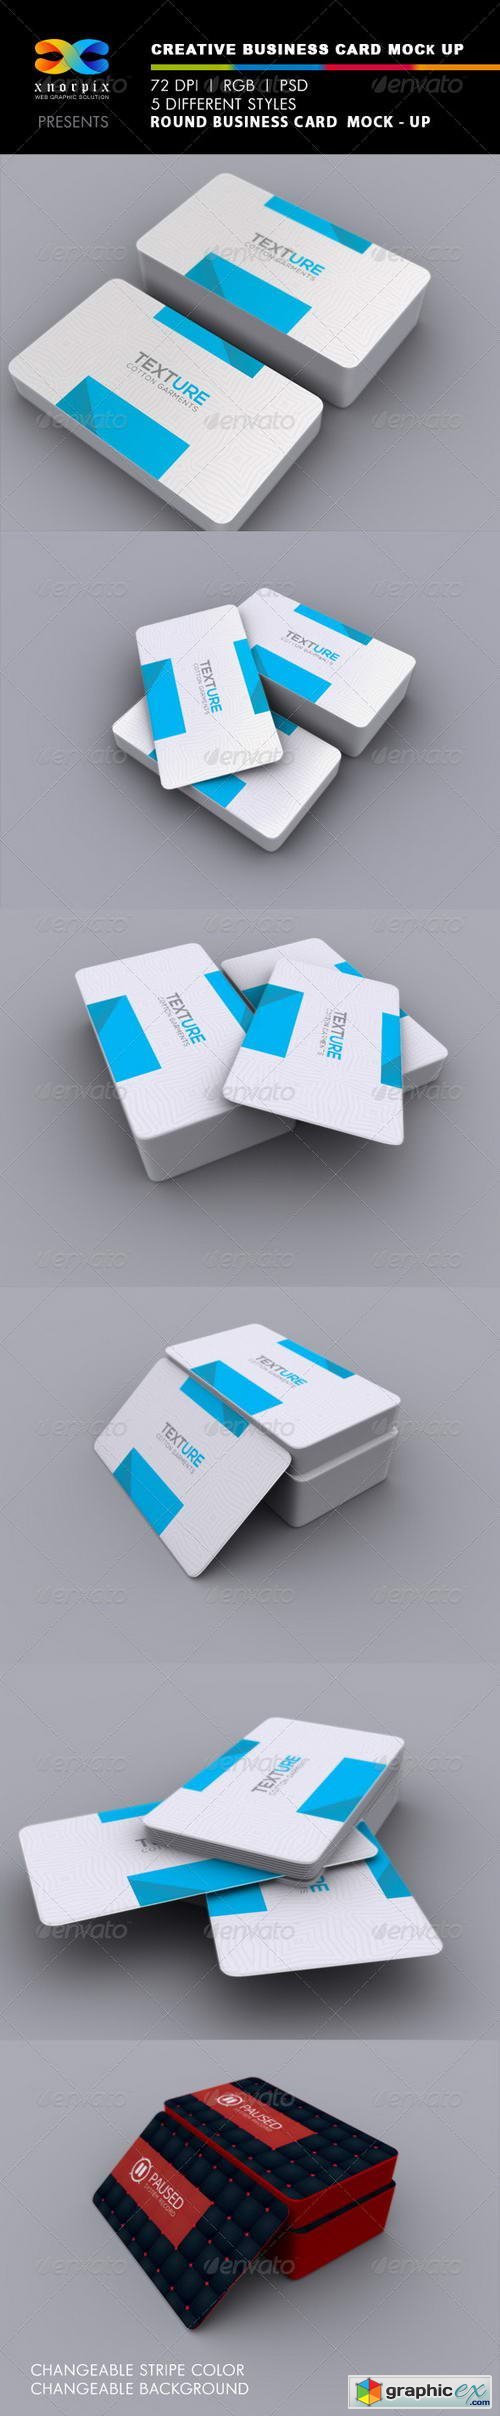 Realistic Round Corner Business Card Mock-up